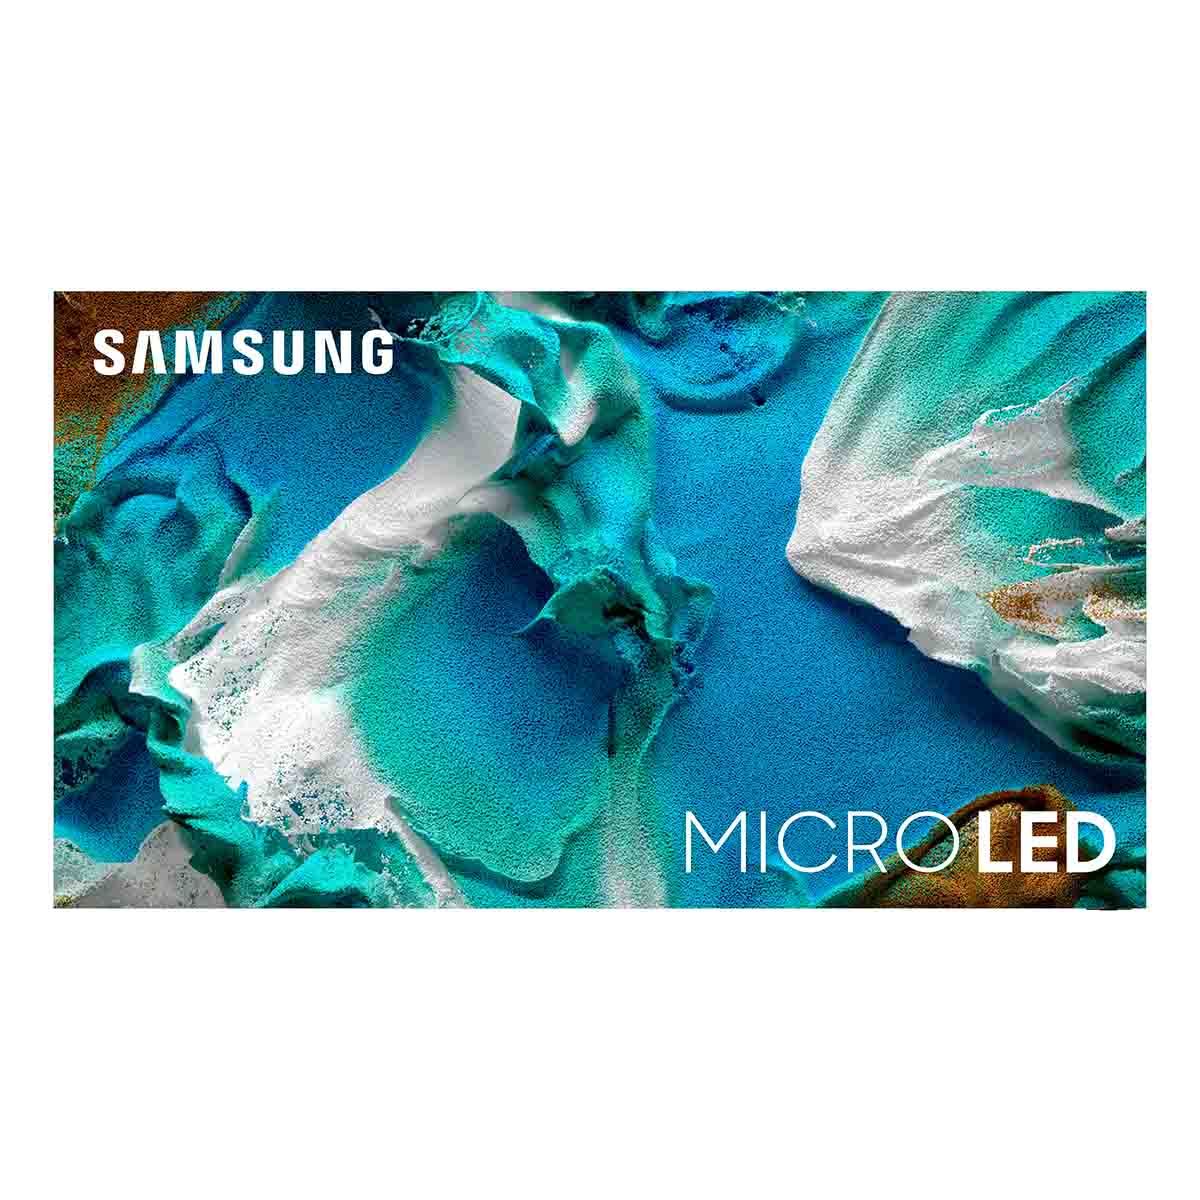 Samsung MS1A MICRO LED 4K TV - 110" - front view